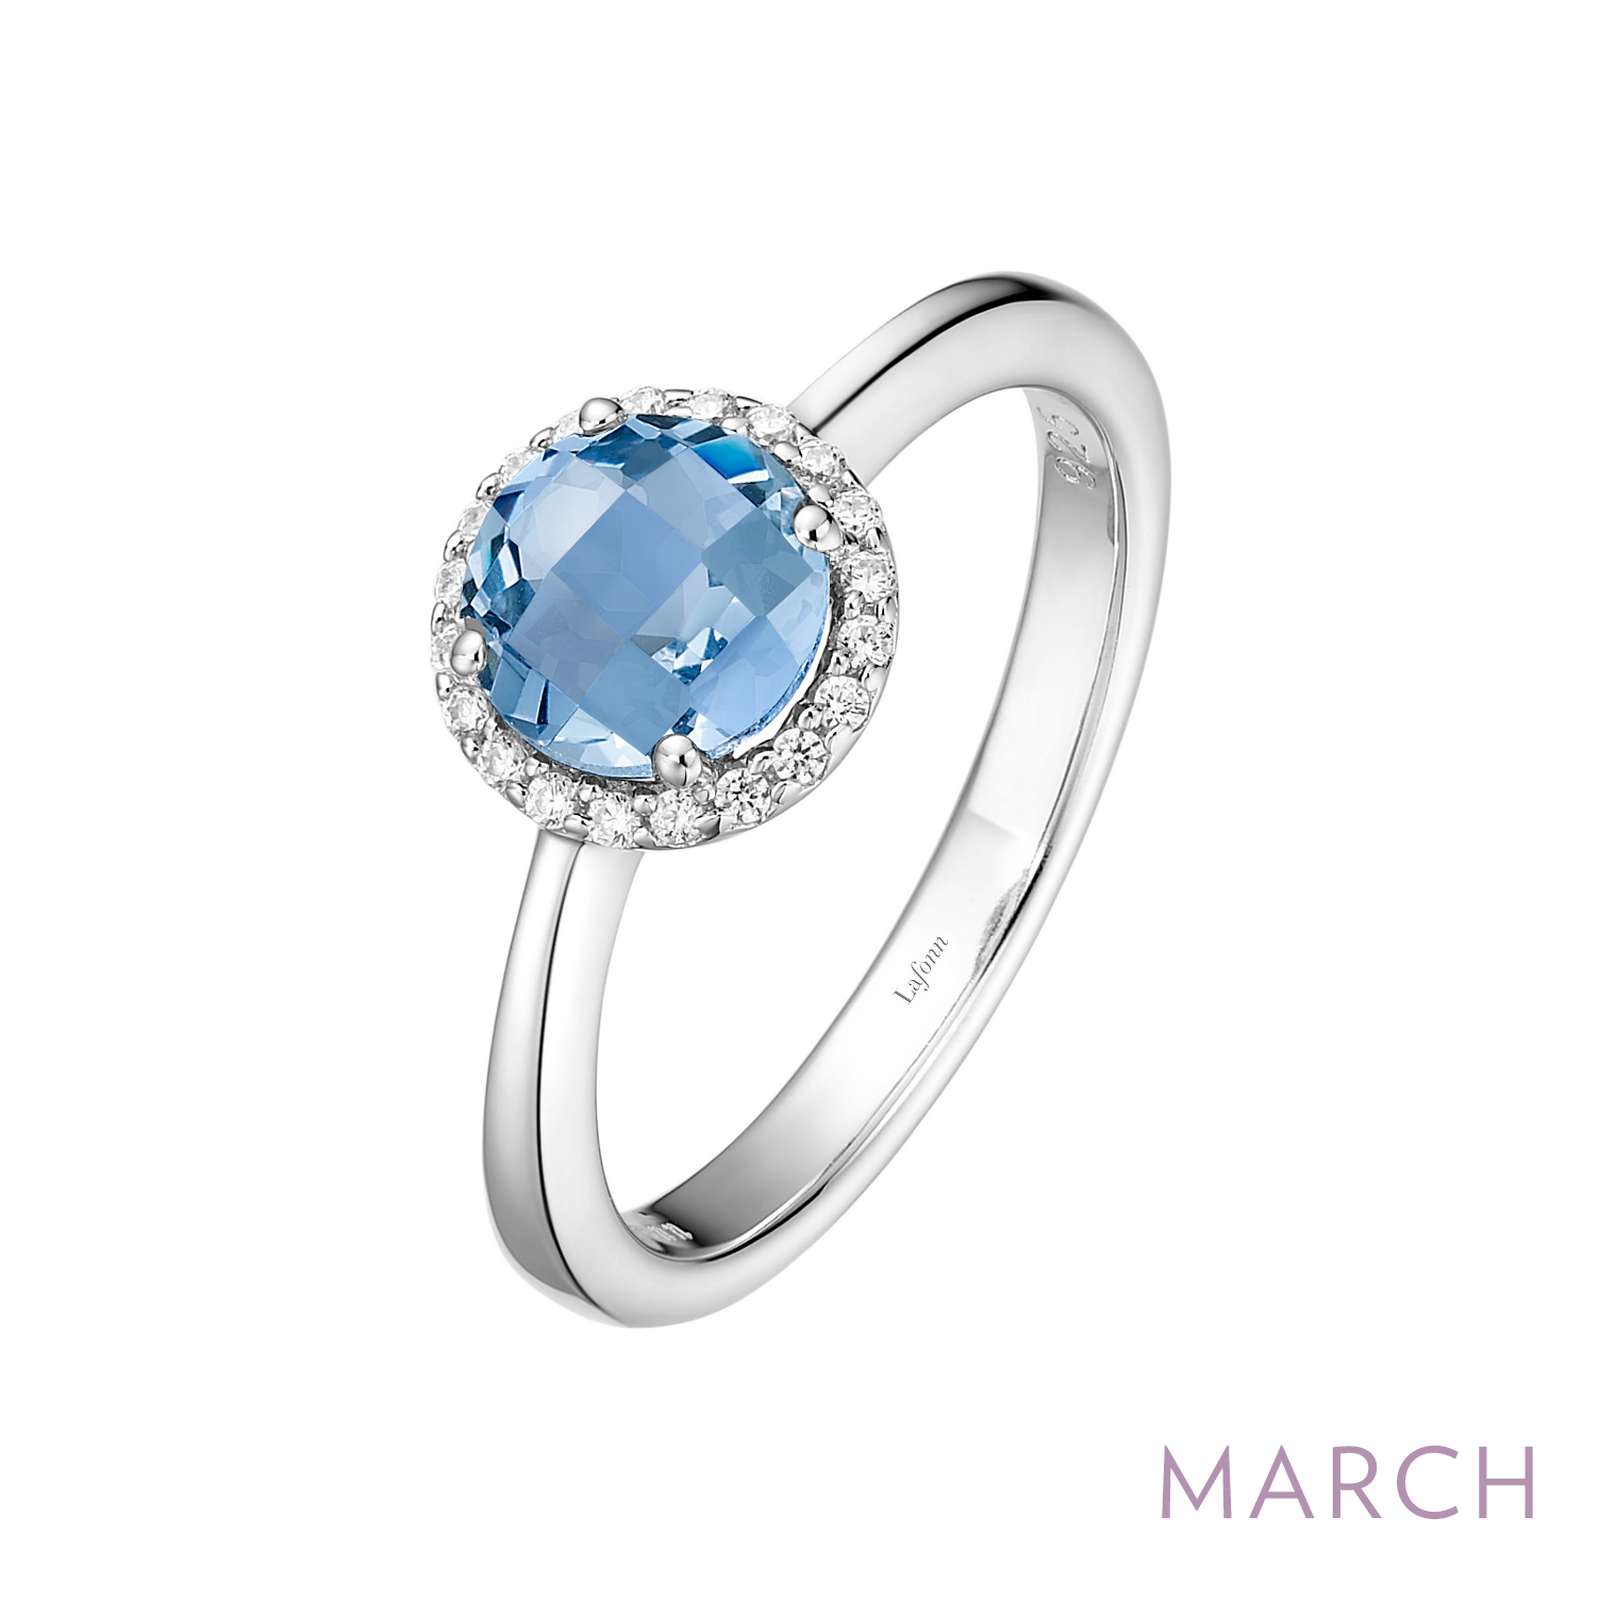 Birthstone March Platinum Bonded Ring Wood's Jewelers Mt. Pleasant, PA